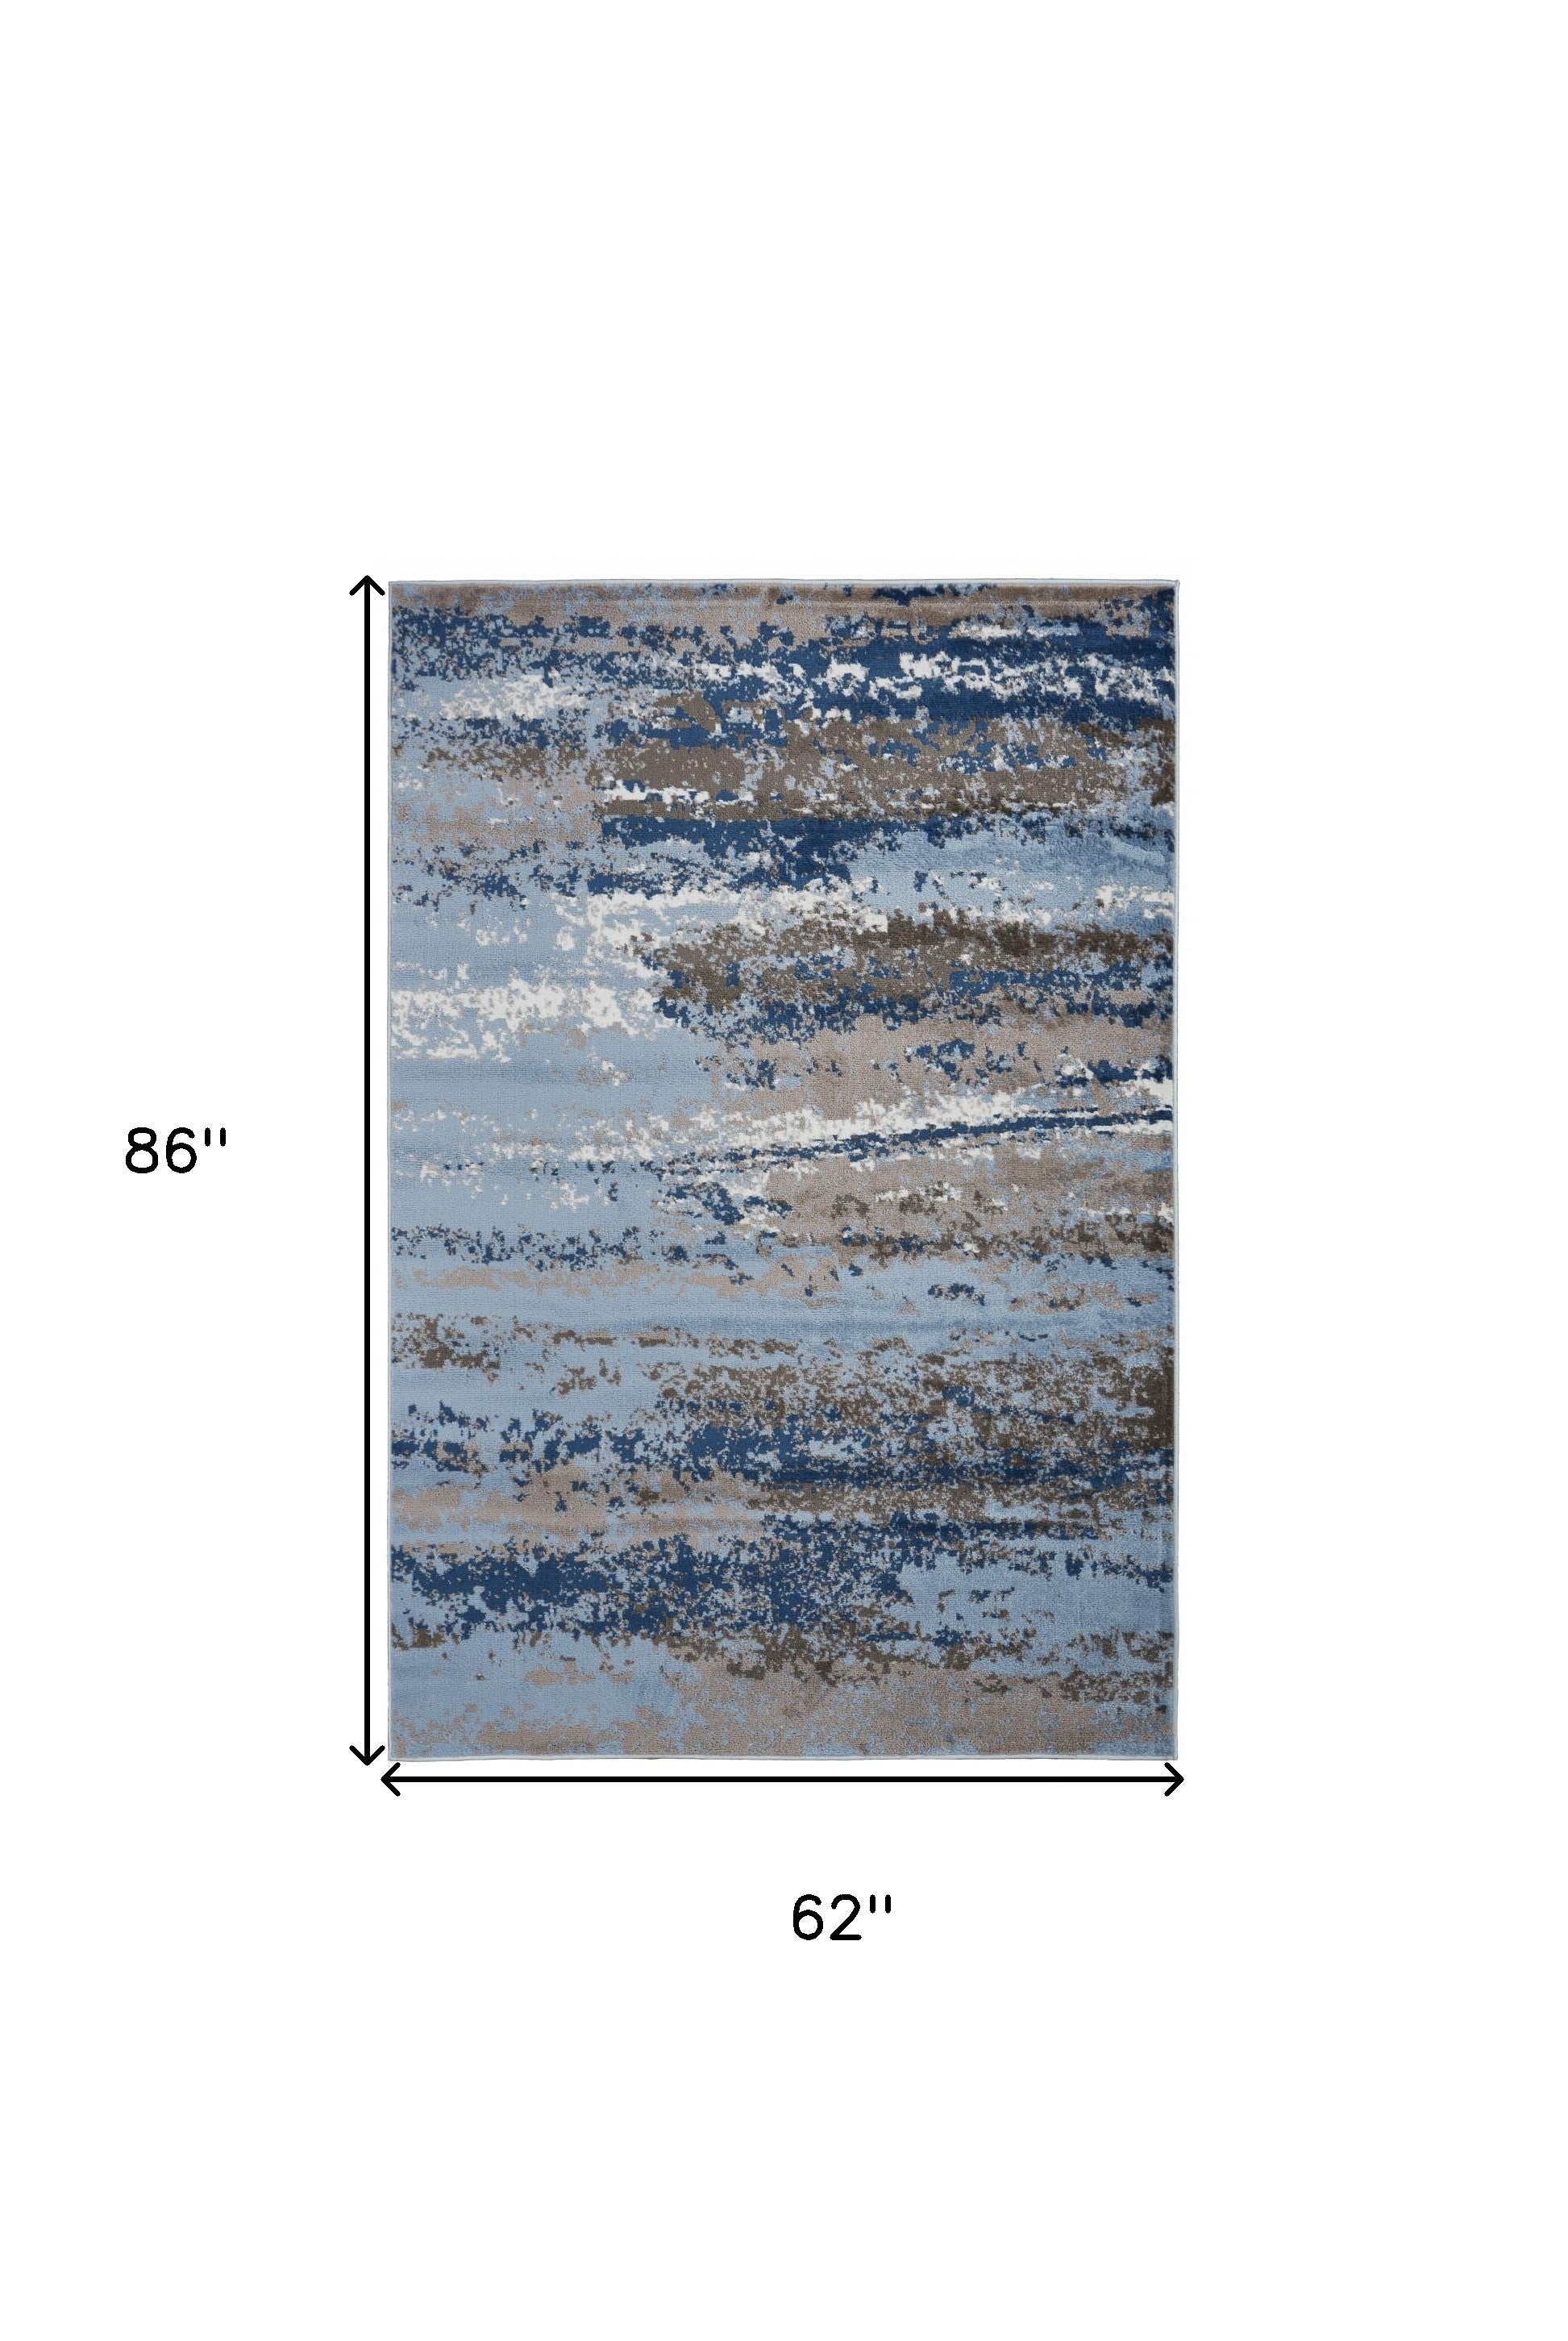 5' X 7' Blue Abstract Area Rug